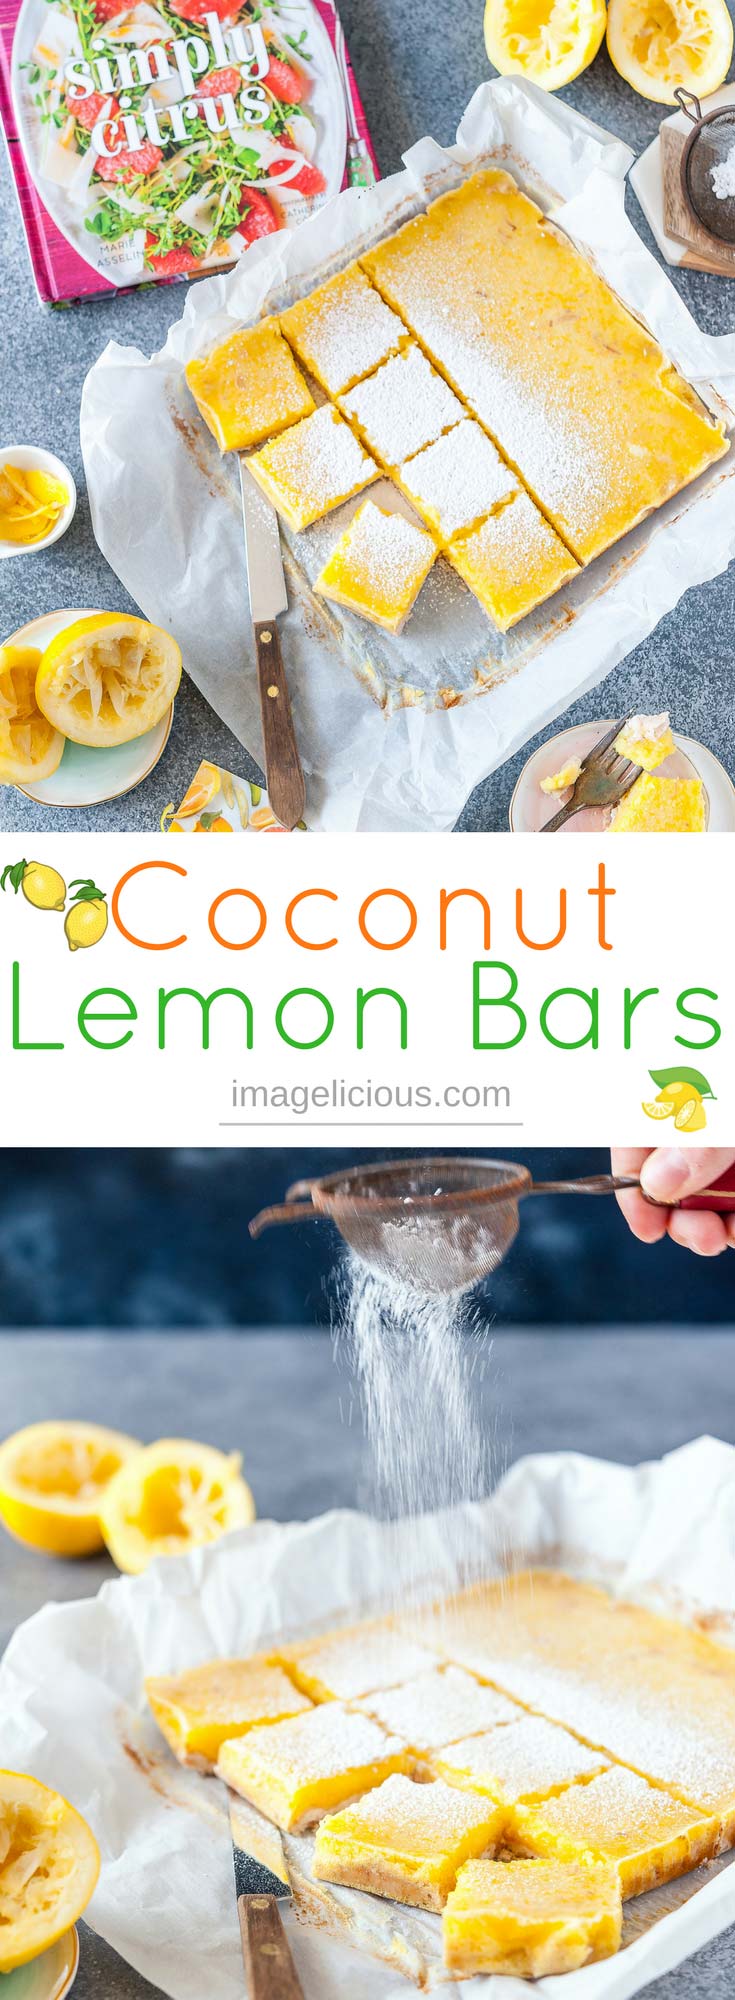 These Coconut Lemon Bars are sweet and tangy with a hint of tropical coconut. They are easy to make without as the lemon curd does not need to be cooked in advance. They look gorgeous and are a perfect addition to a cookie platter | imagelicious.com #SimplyCitrus #lemon #lemonbars #lemonsquares #coconut #dessert